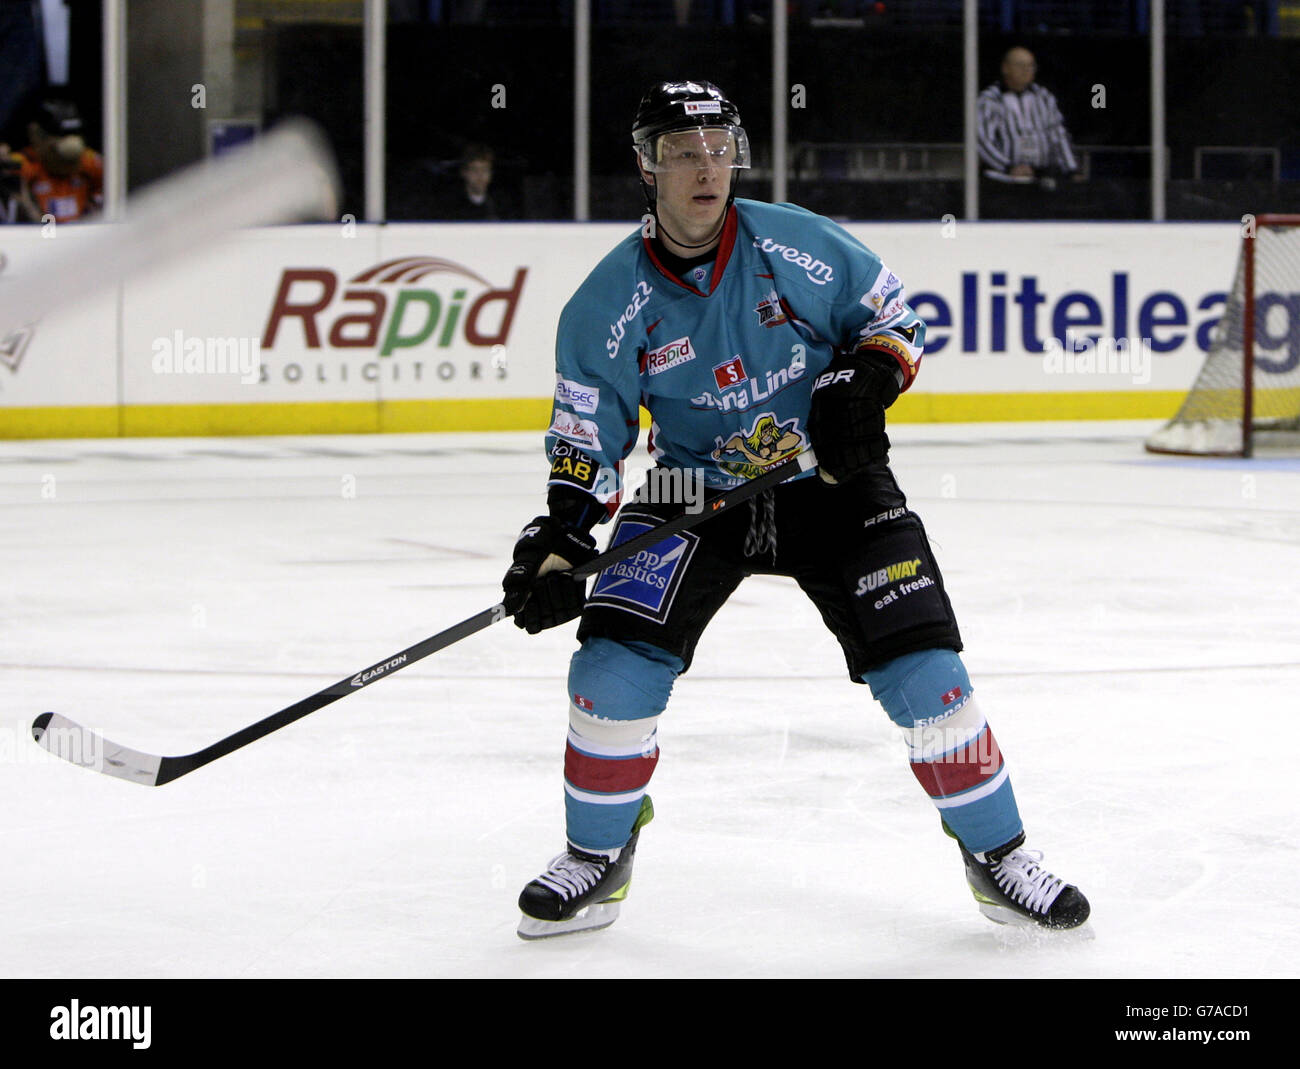 Hockey sur glace - Rapid Solicitors Elite Ice Hockey League - 2014 Play offs - final - Belfast Giants / Sheffield Steelers - capita. Robby Sandrock, Belfast Giants Banque D'Images